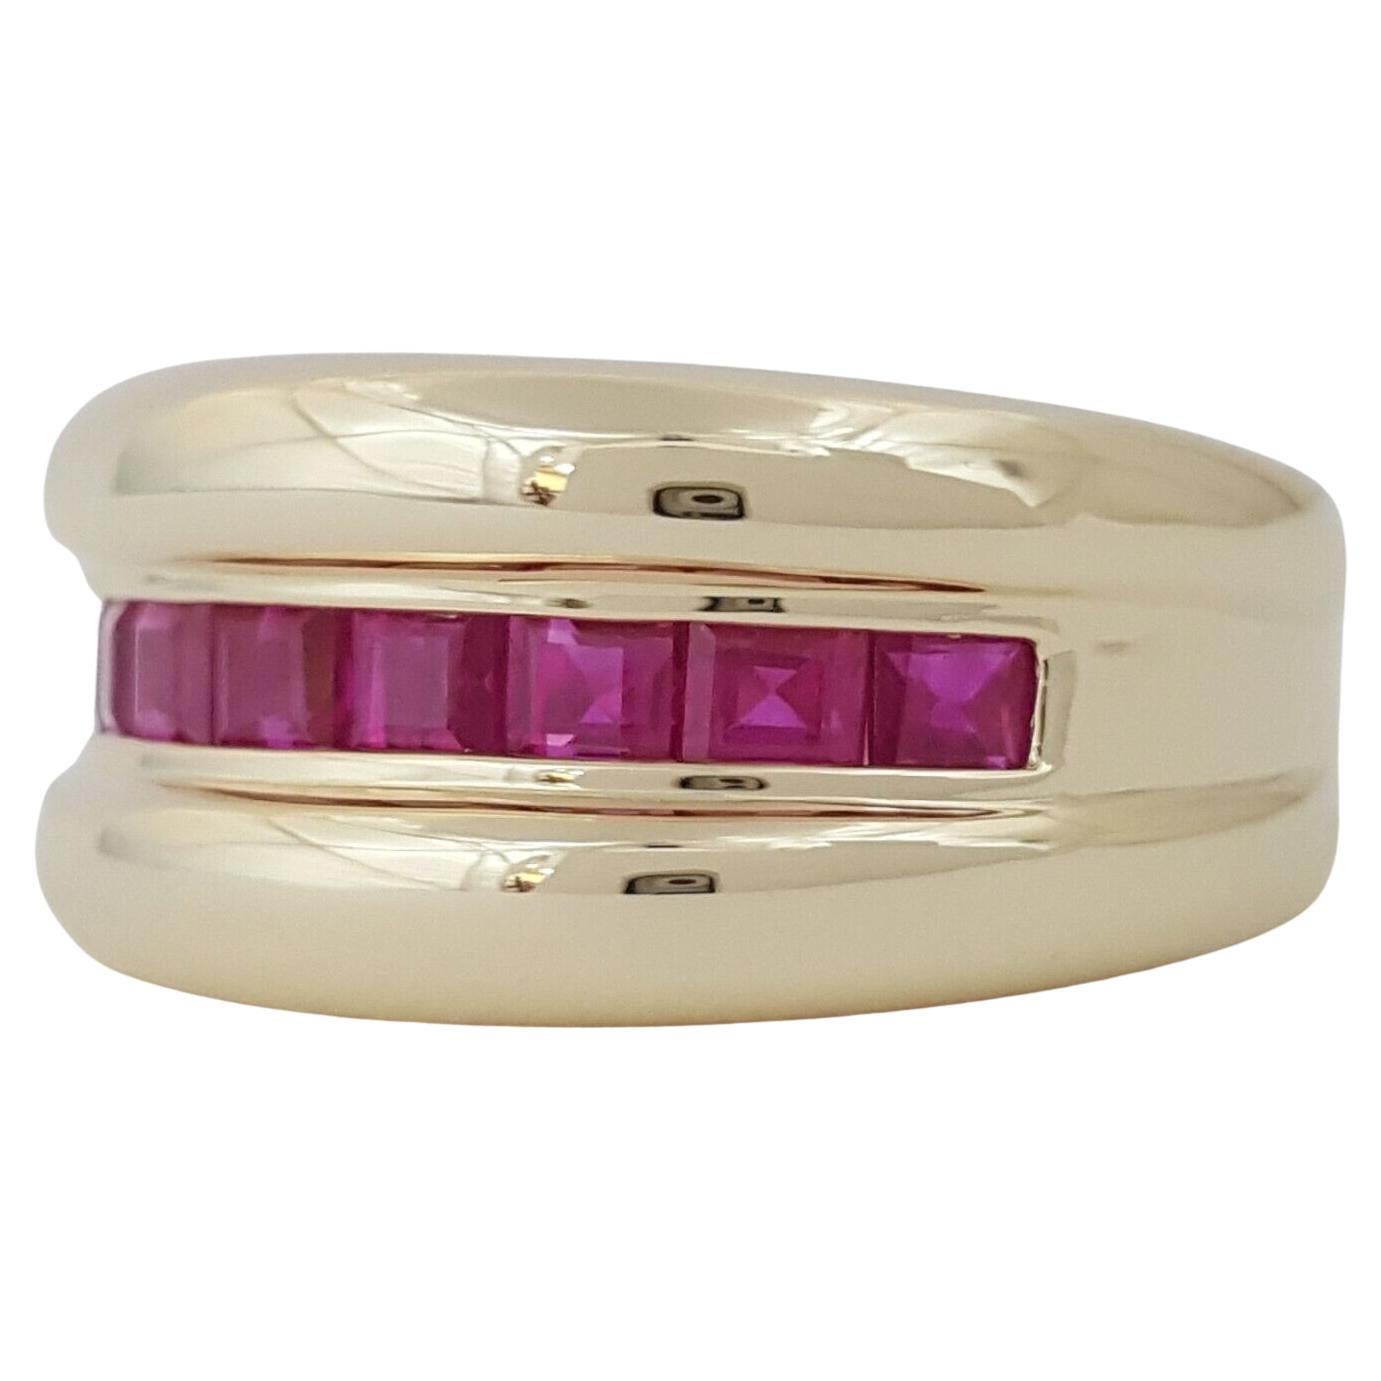 This 14k Yellow Gold ring, weighing 6.7 grams and sized at 6.25, boasts 8 Natural Square Shaped Red Rubies, totaling approximately 1.2 carats, in a Princess Cut Channel Setting, perfect for weddings or making a bold statement.